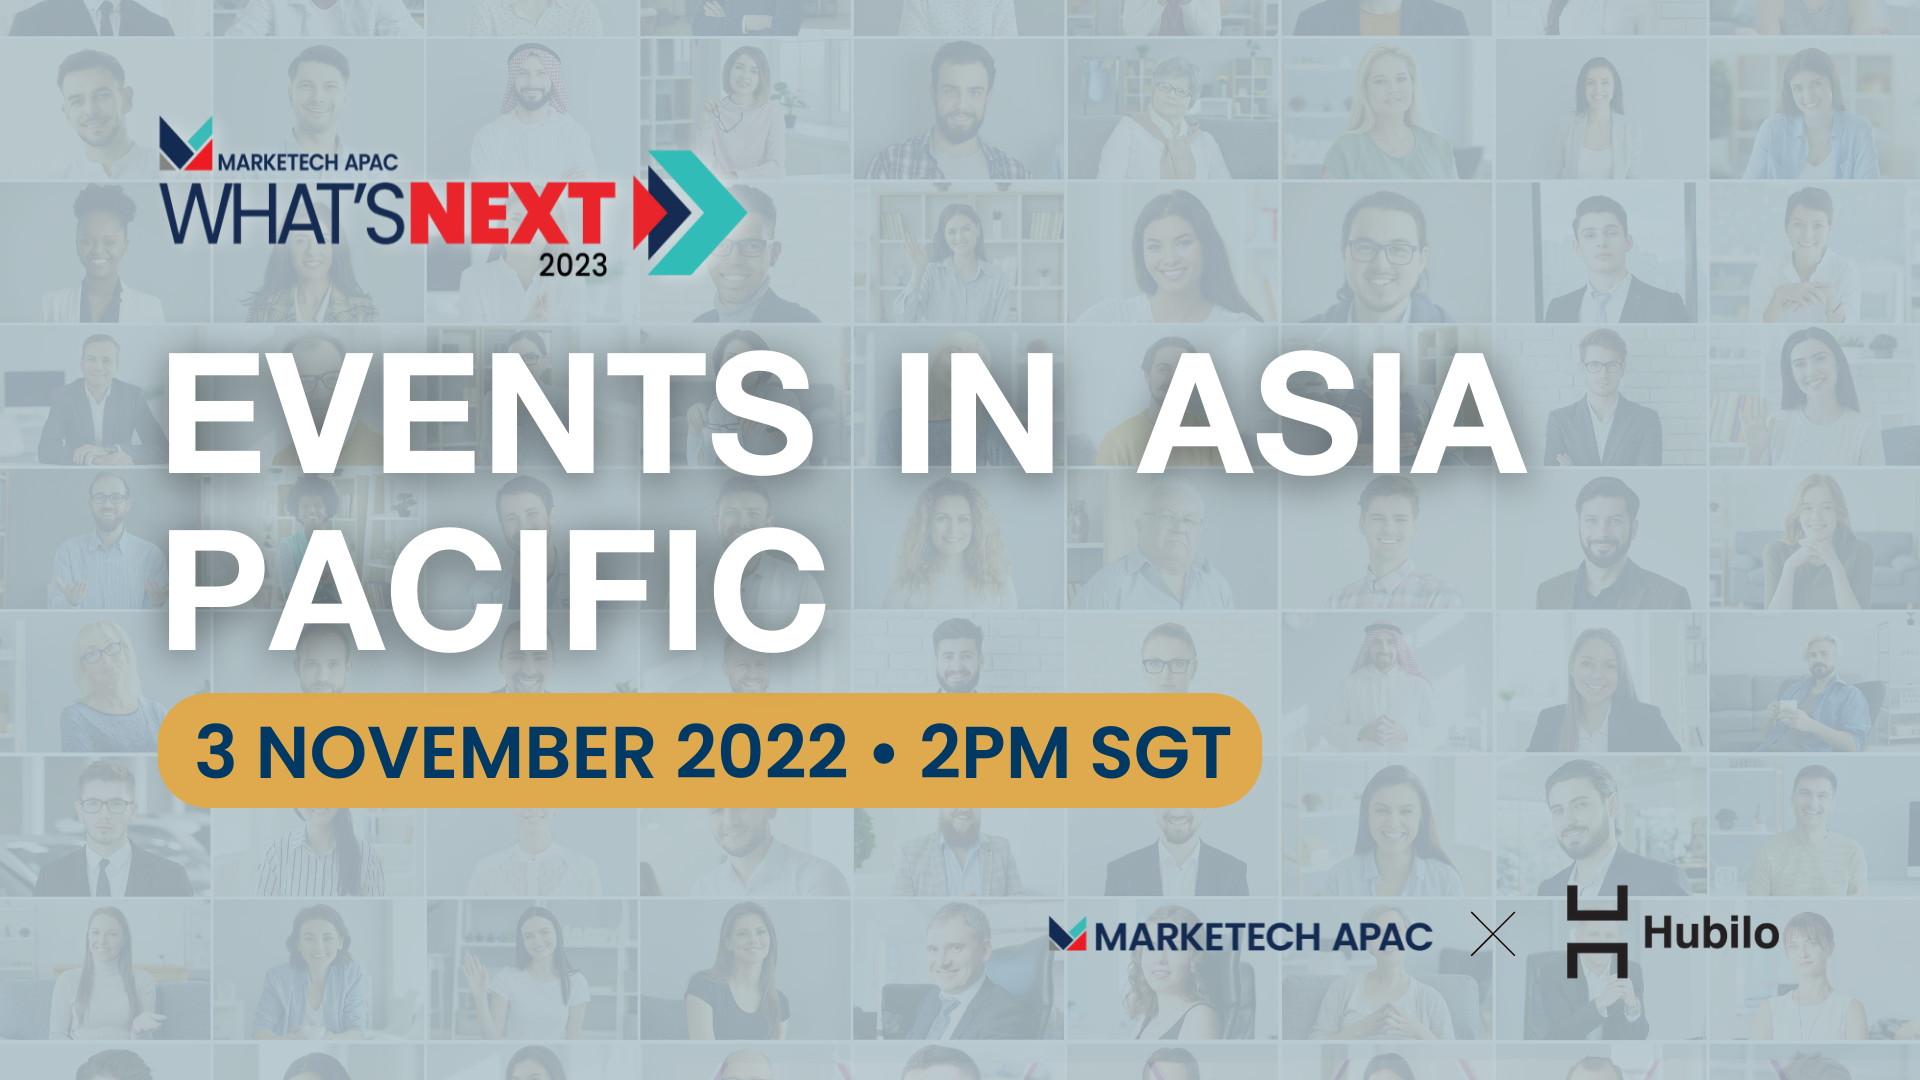 MARKETECH APAC’s upcoming webinar to discuss how to future-proof brands’ event marketing strategies